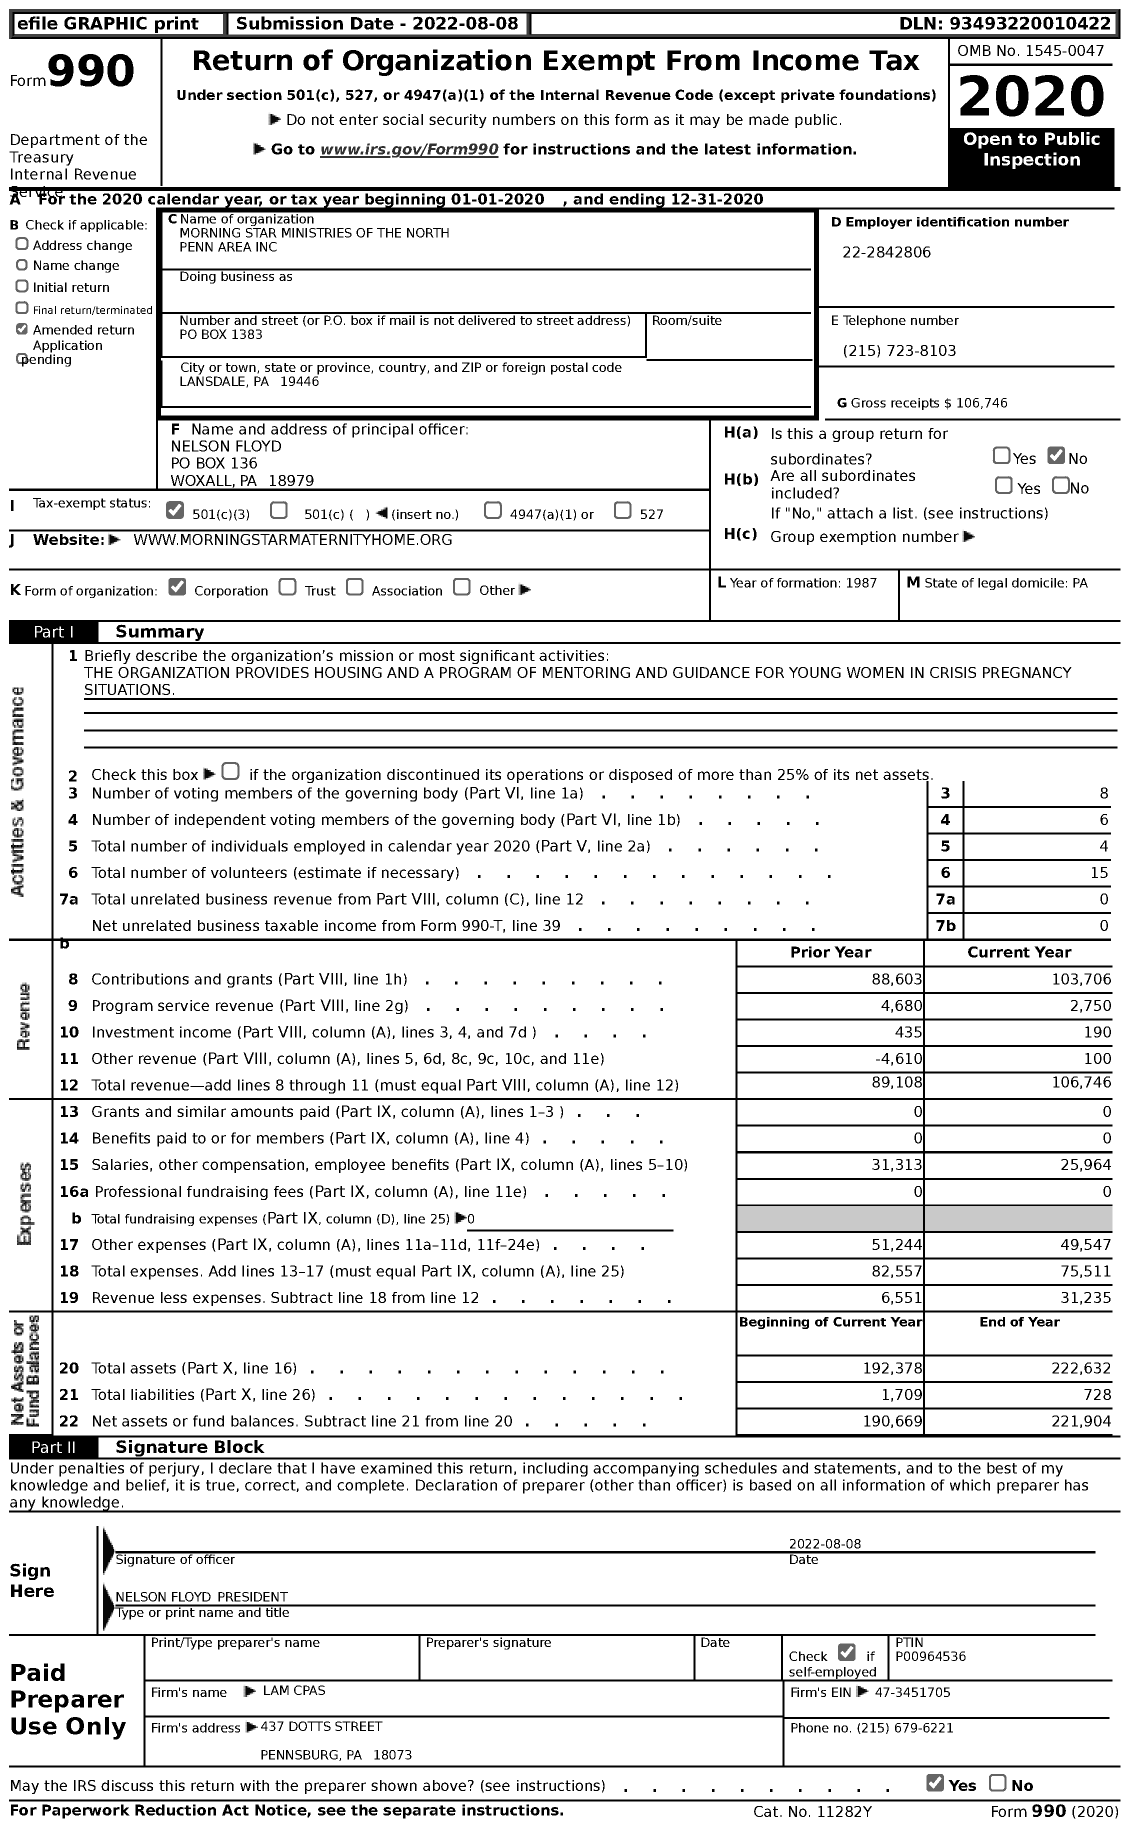 Image of first page of 2020 Form 990 for Morning Star Ministries of the North Penn Area